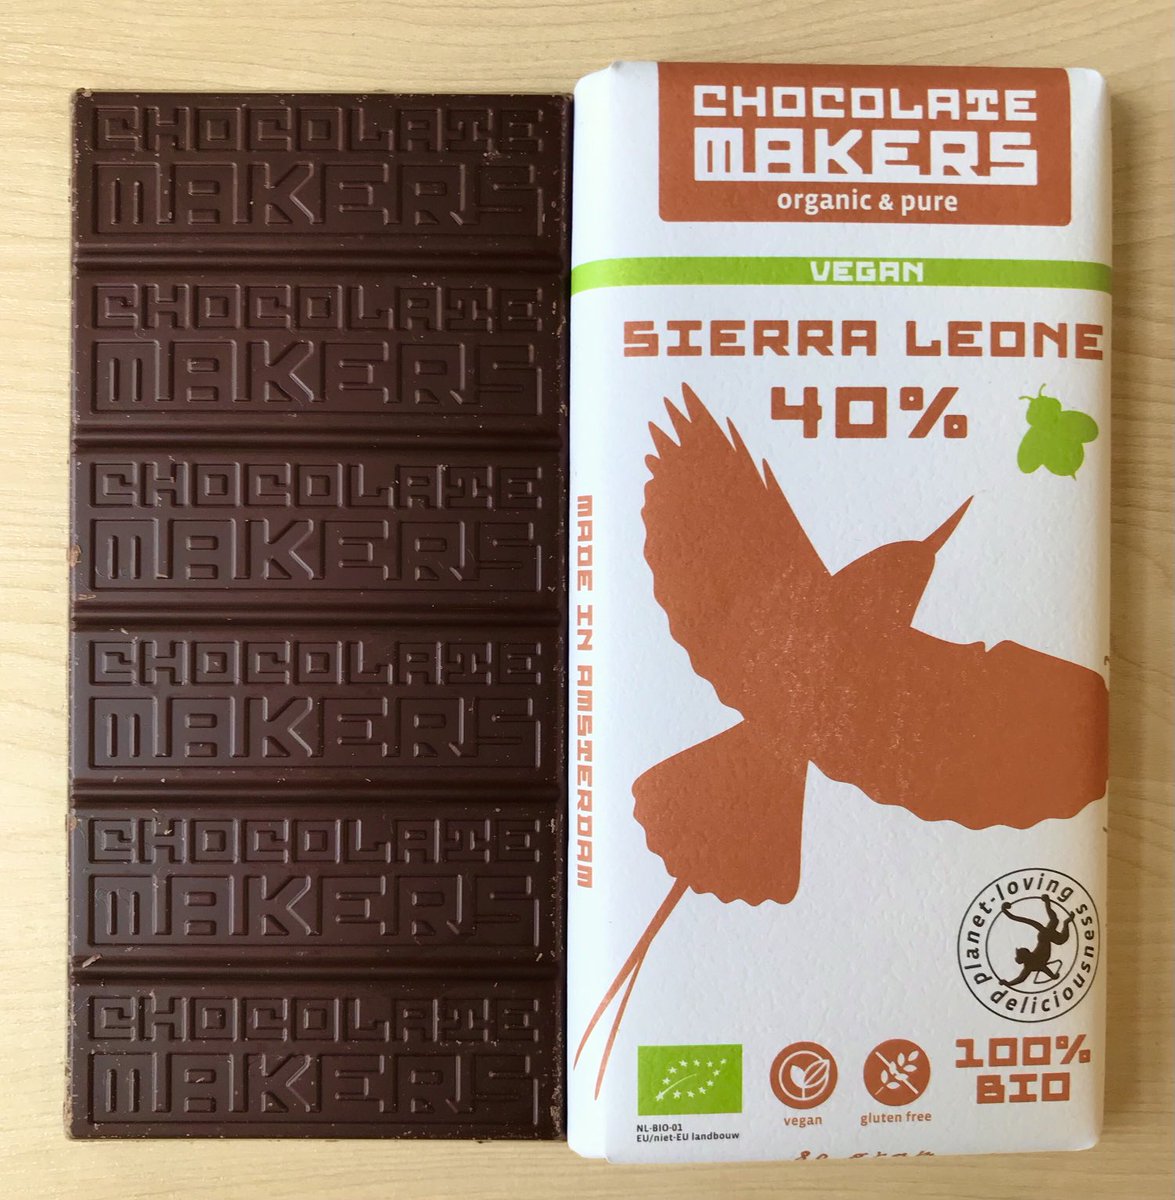 We’re enjoying this simply beautiful (oat) milk bar, made with love in Amsterdam by ⁦@Chocolademakers⁩ using beans from the Village Hope programme in Sierra Leone. I have good friends in that beautiful country and would love more people to savour the cacao from there